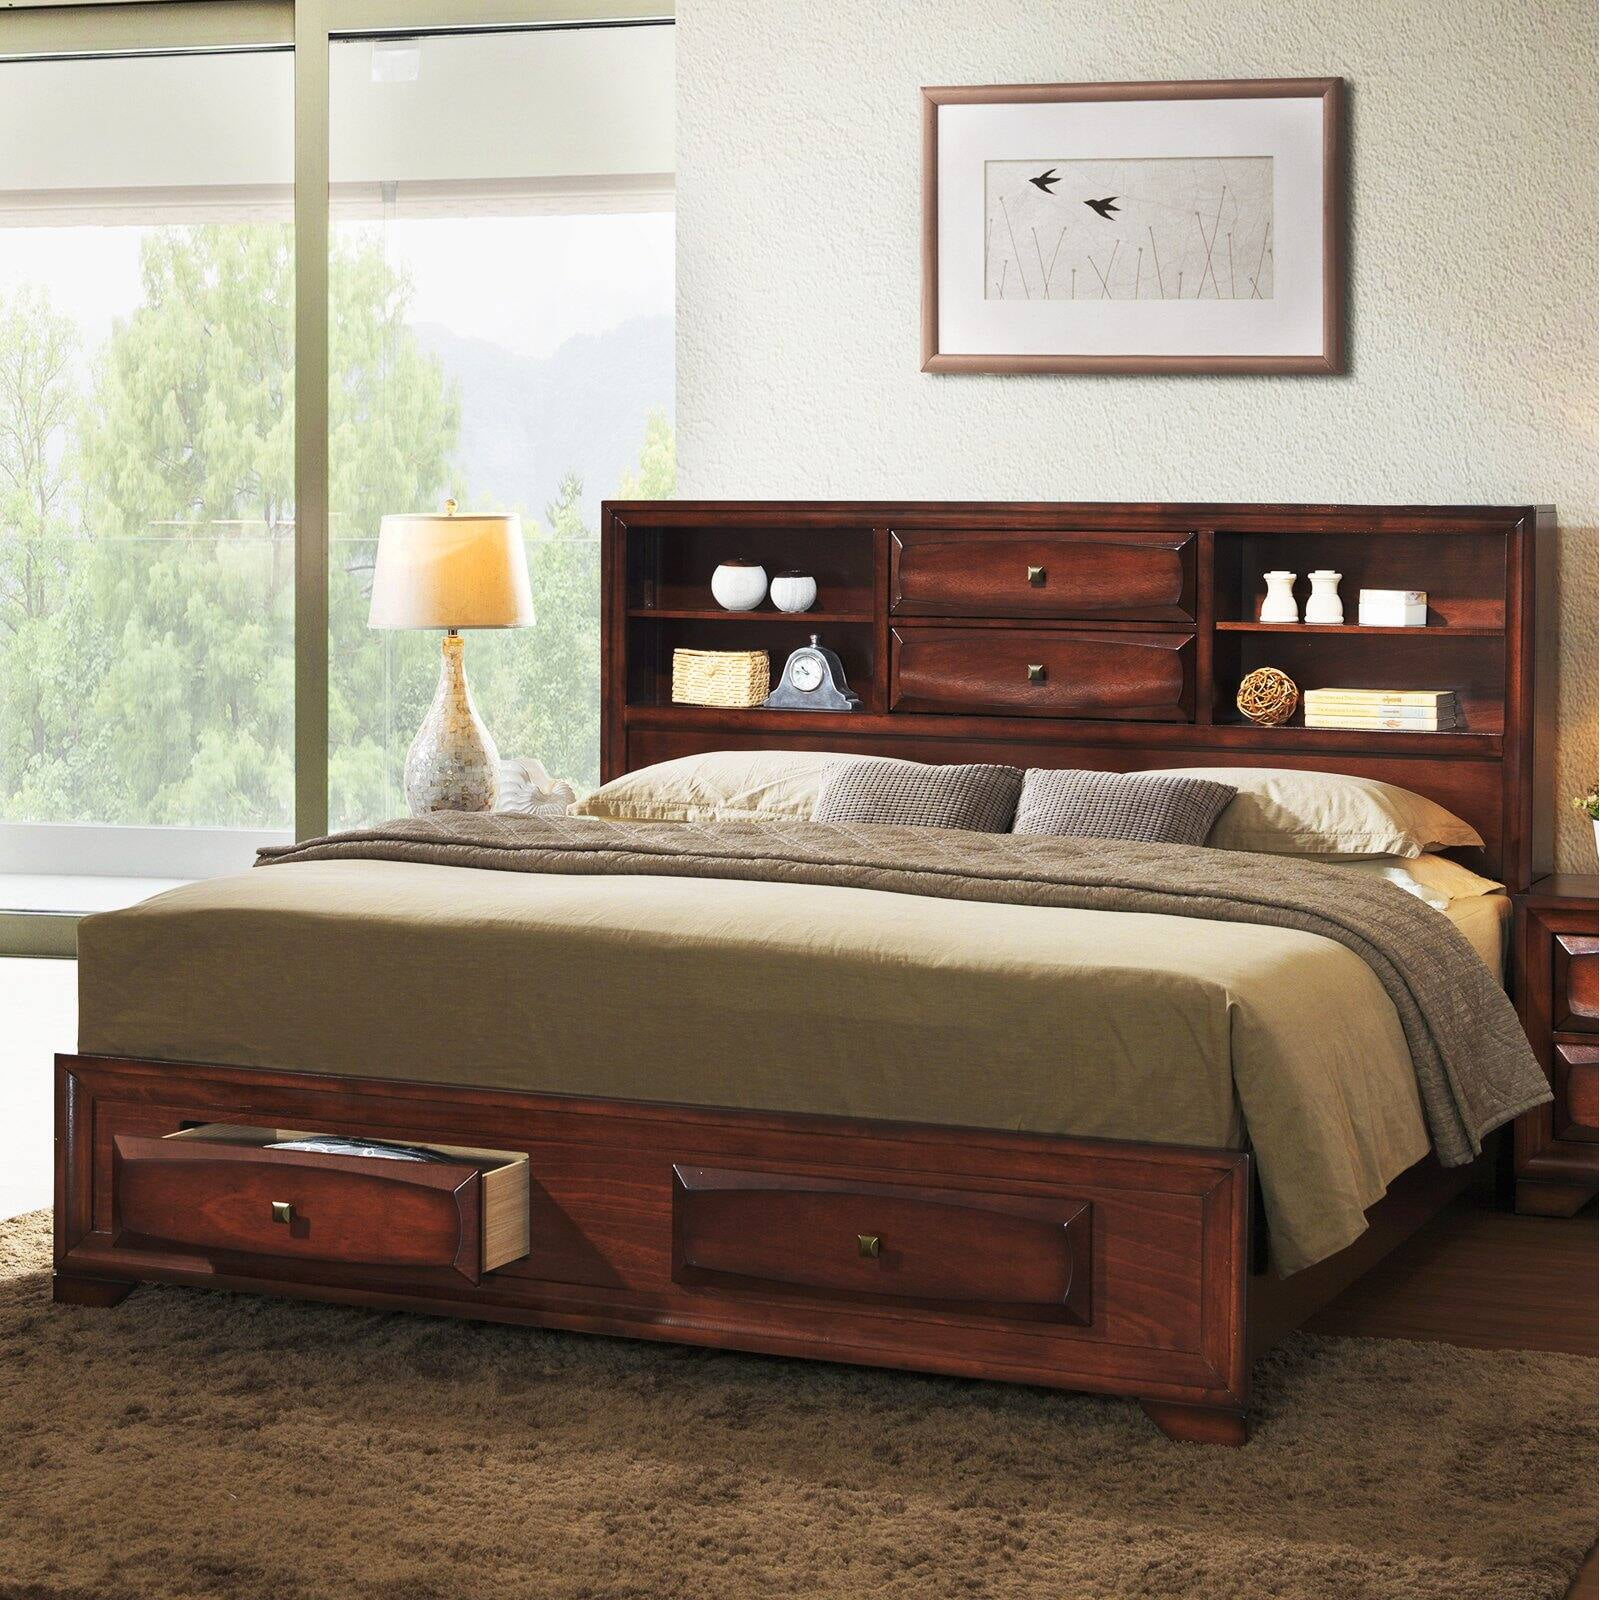 Roundhill Furniture Asger Wood Bedroom Set With Upholstered King Bed Antique Gray